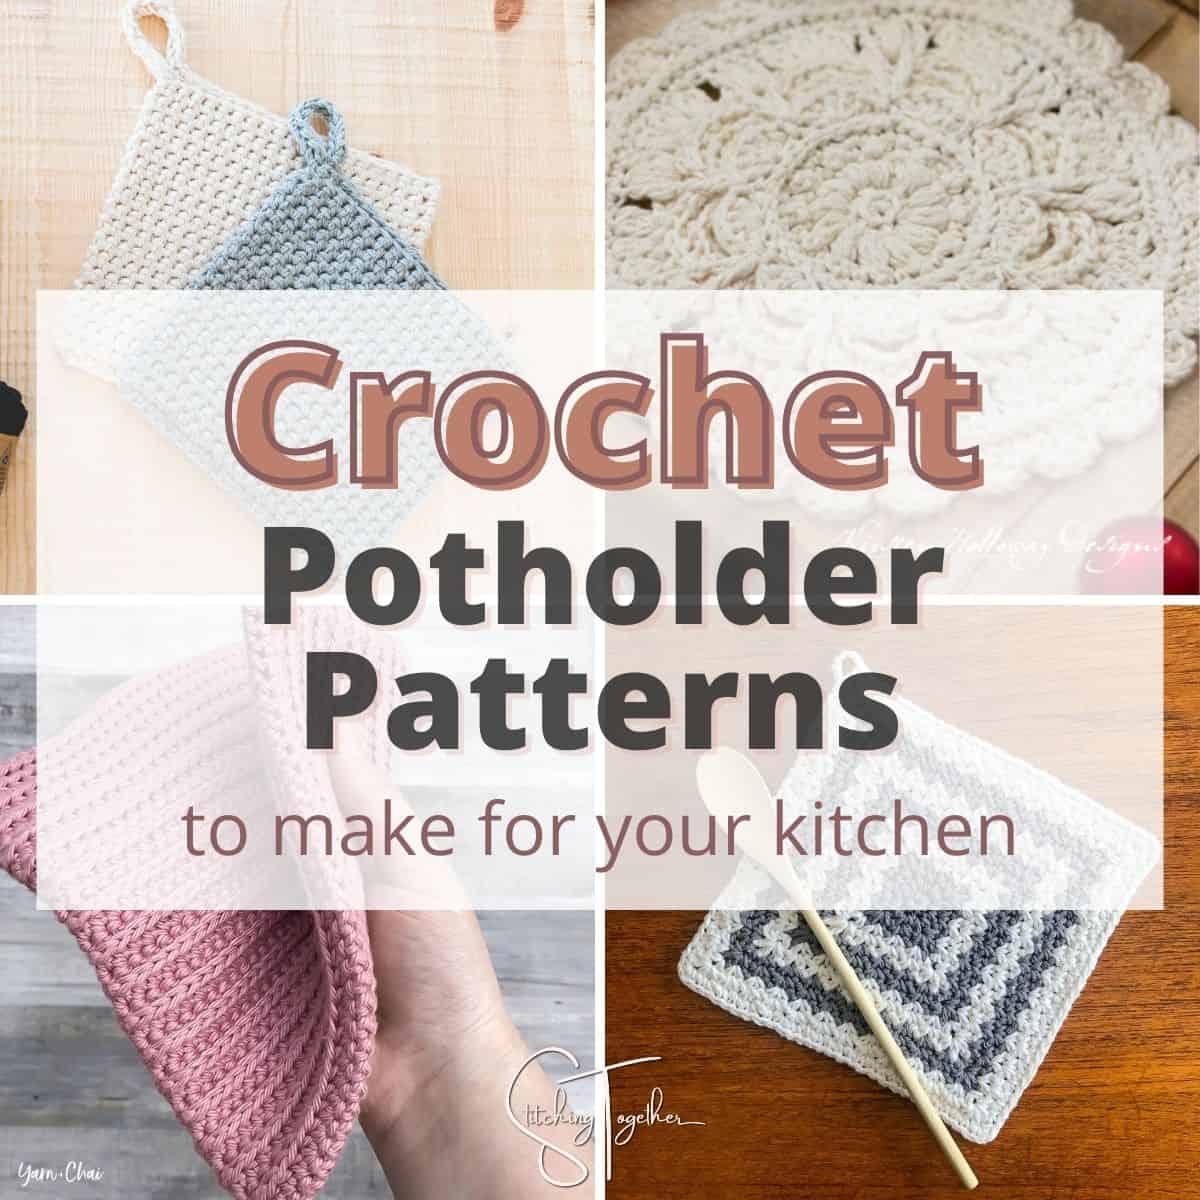 graphic with collage of potholders and text "crochet potholder patterns to make for your kitchen"